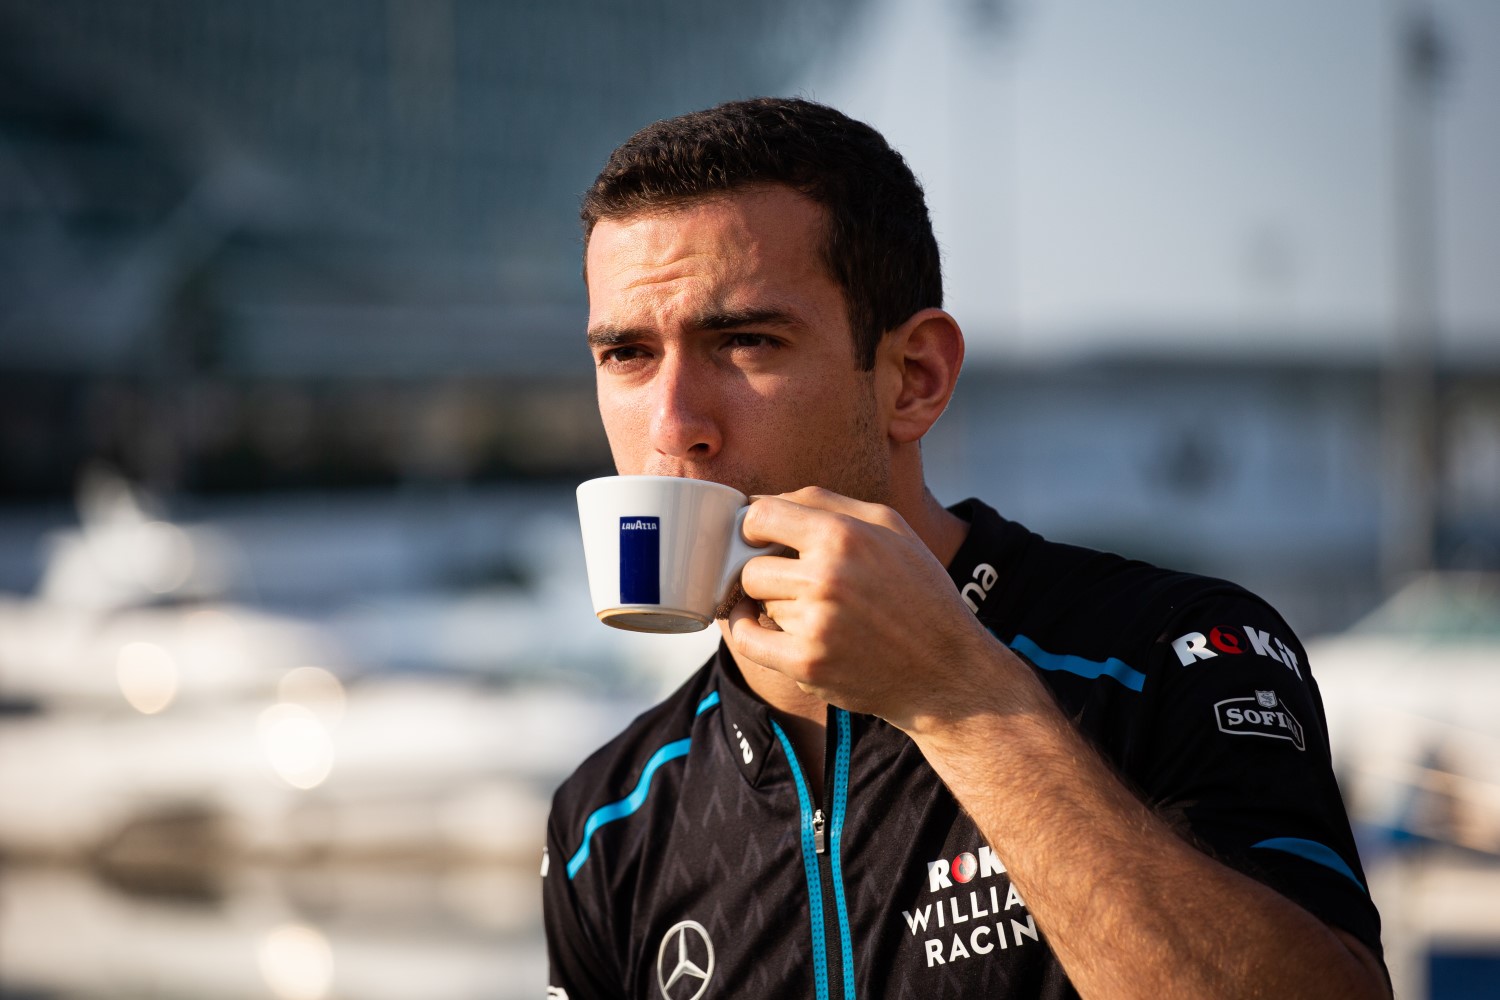 Nicholas Latifi's billionaire father keeps sending new sponsors their way. He likely does a lot of business with Royal Bank of Canada